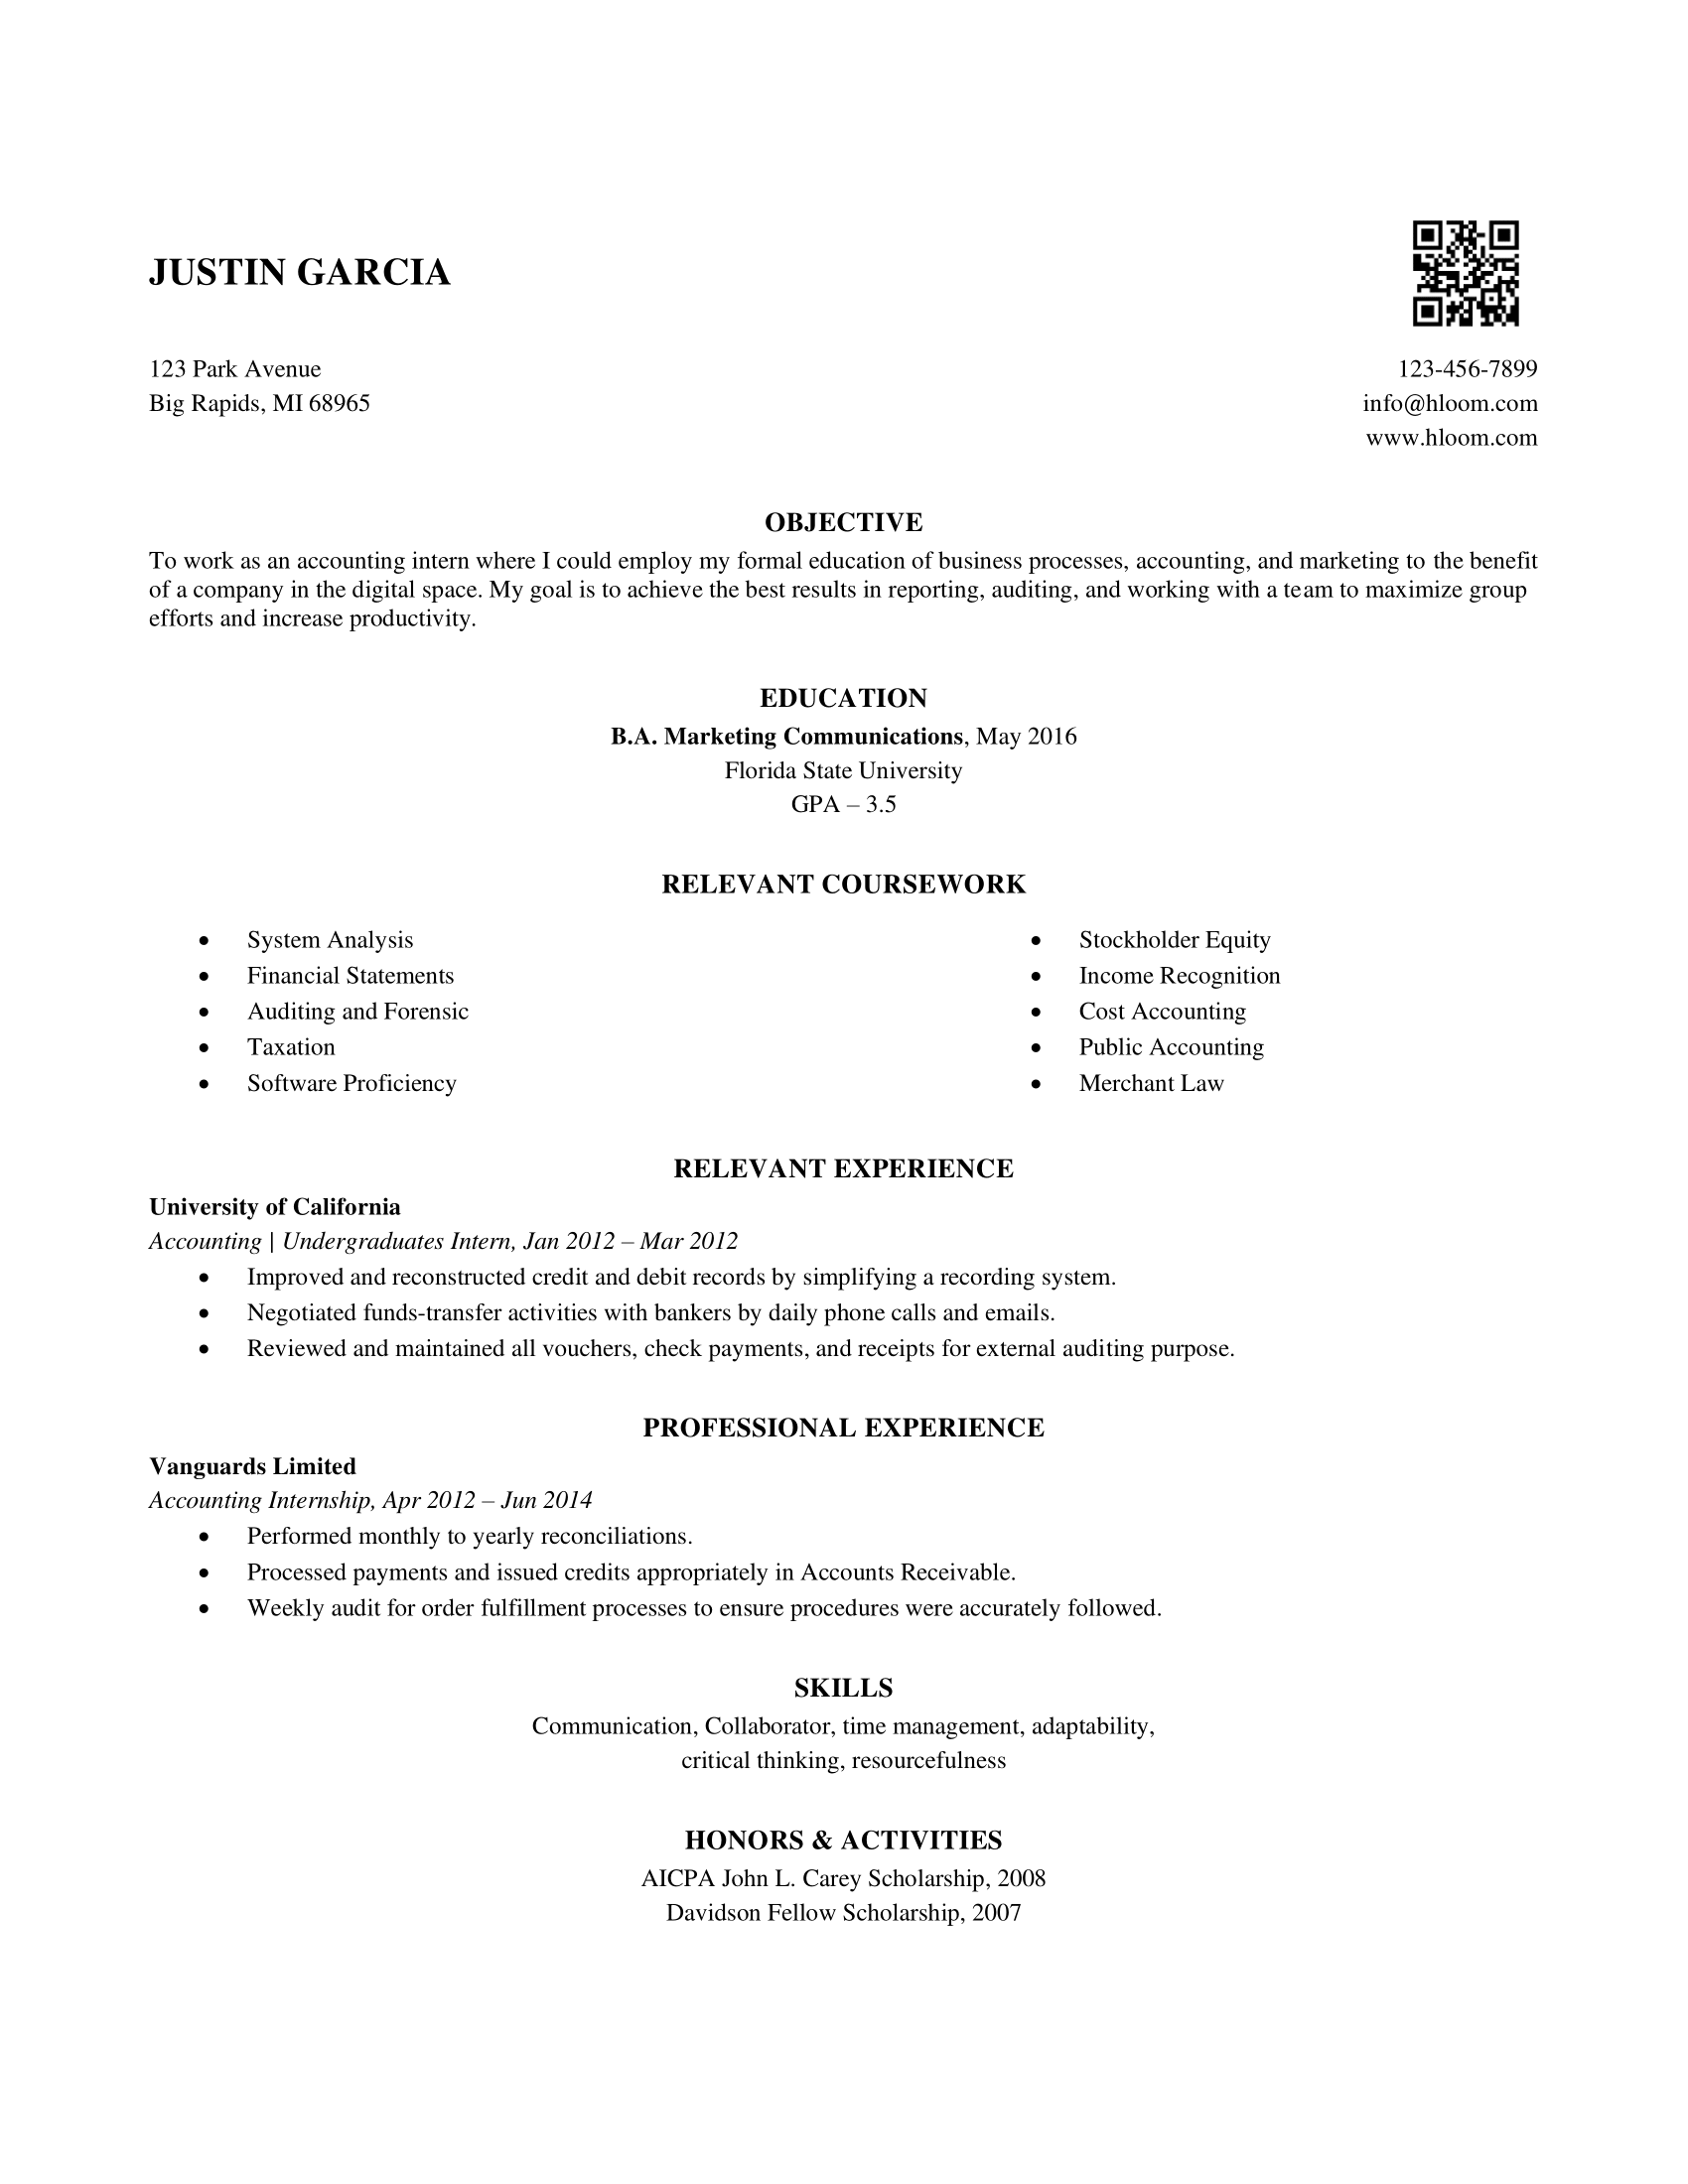 Cover Letter For Finance Internship With No Experience from www.hloom.com